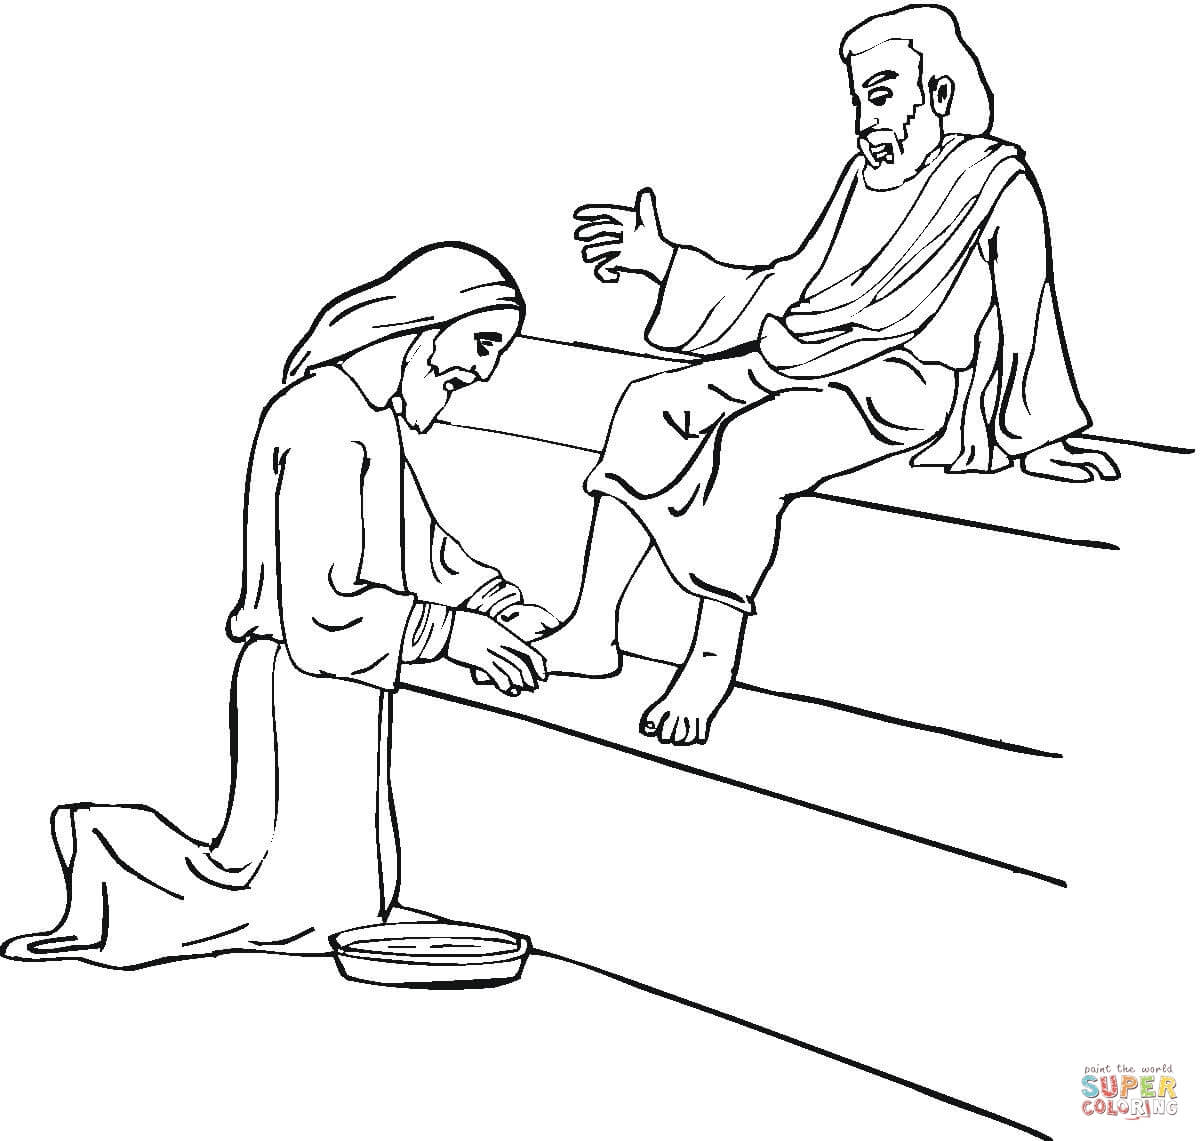 Jesus Washing the Disciples Feet coloring page | Free Printable ...